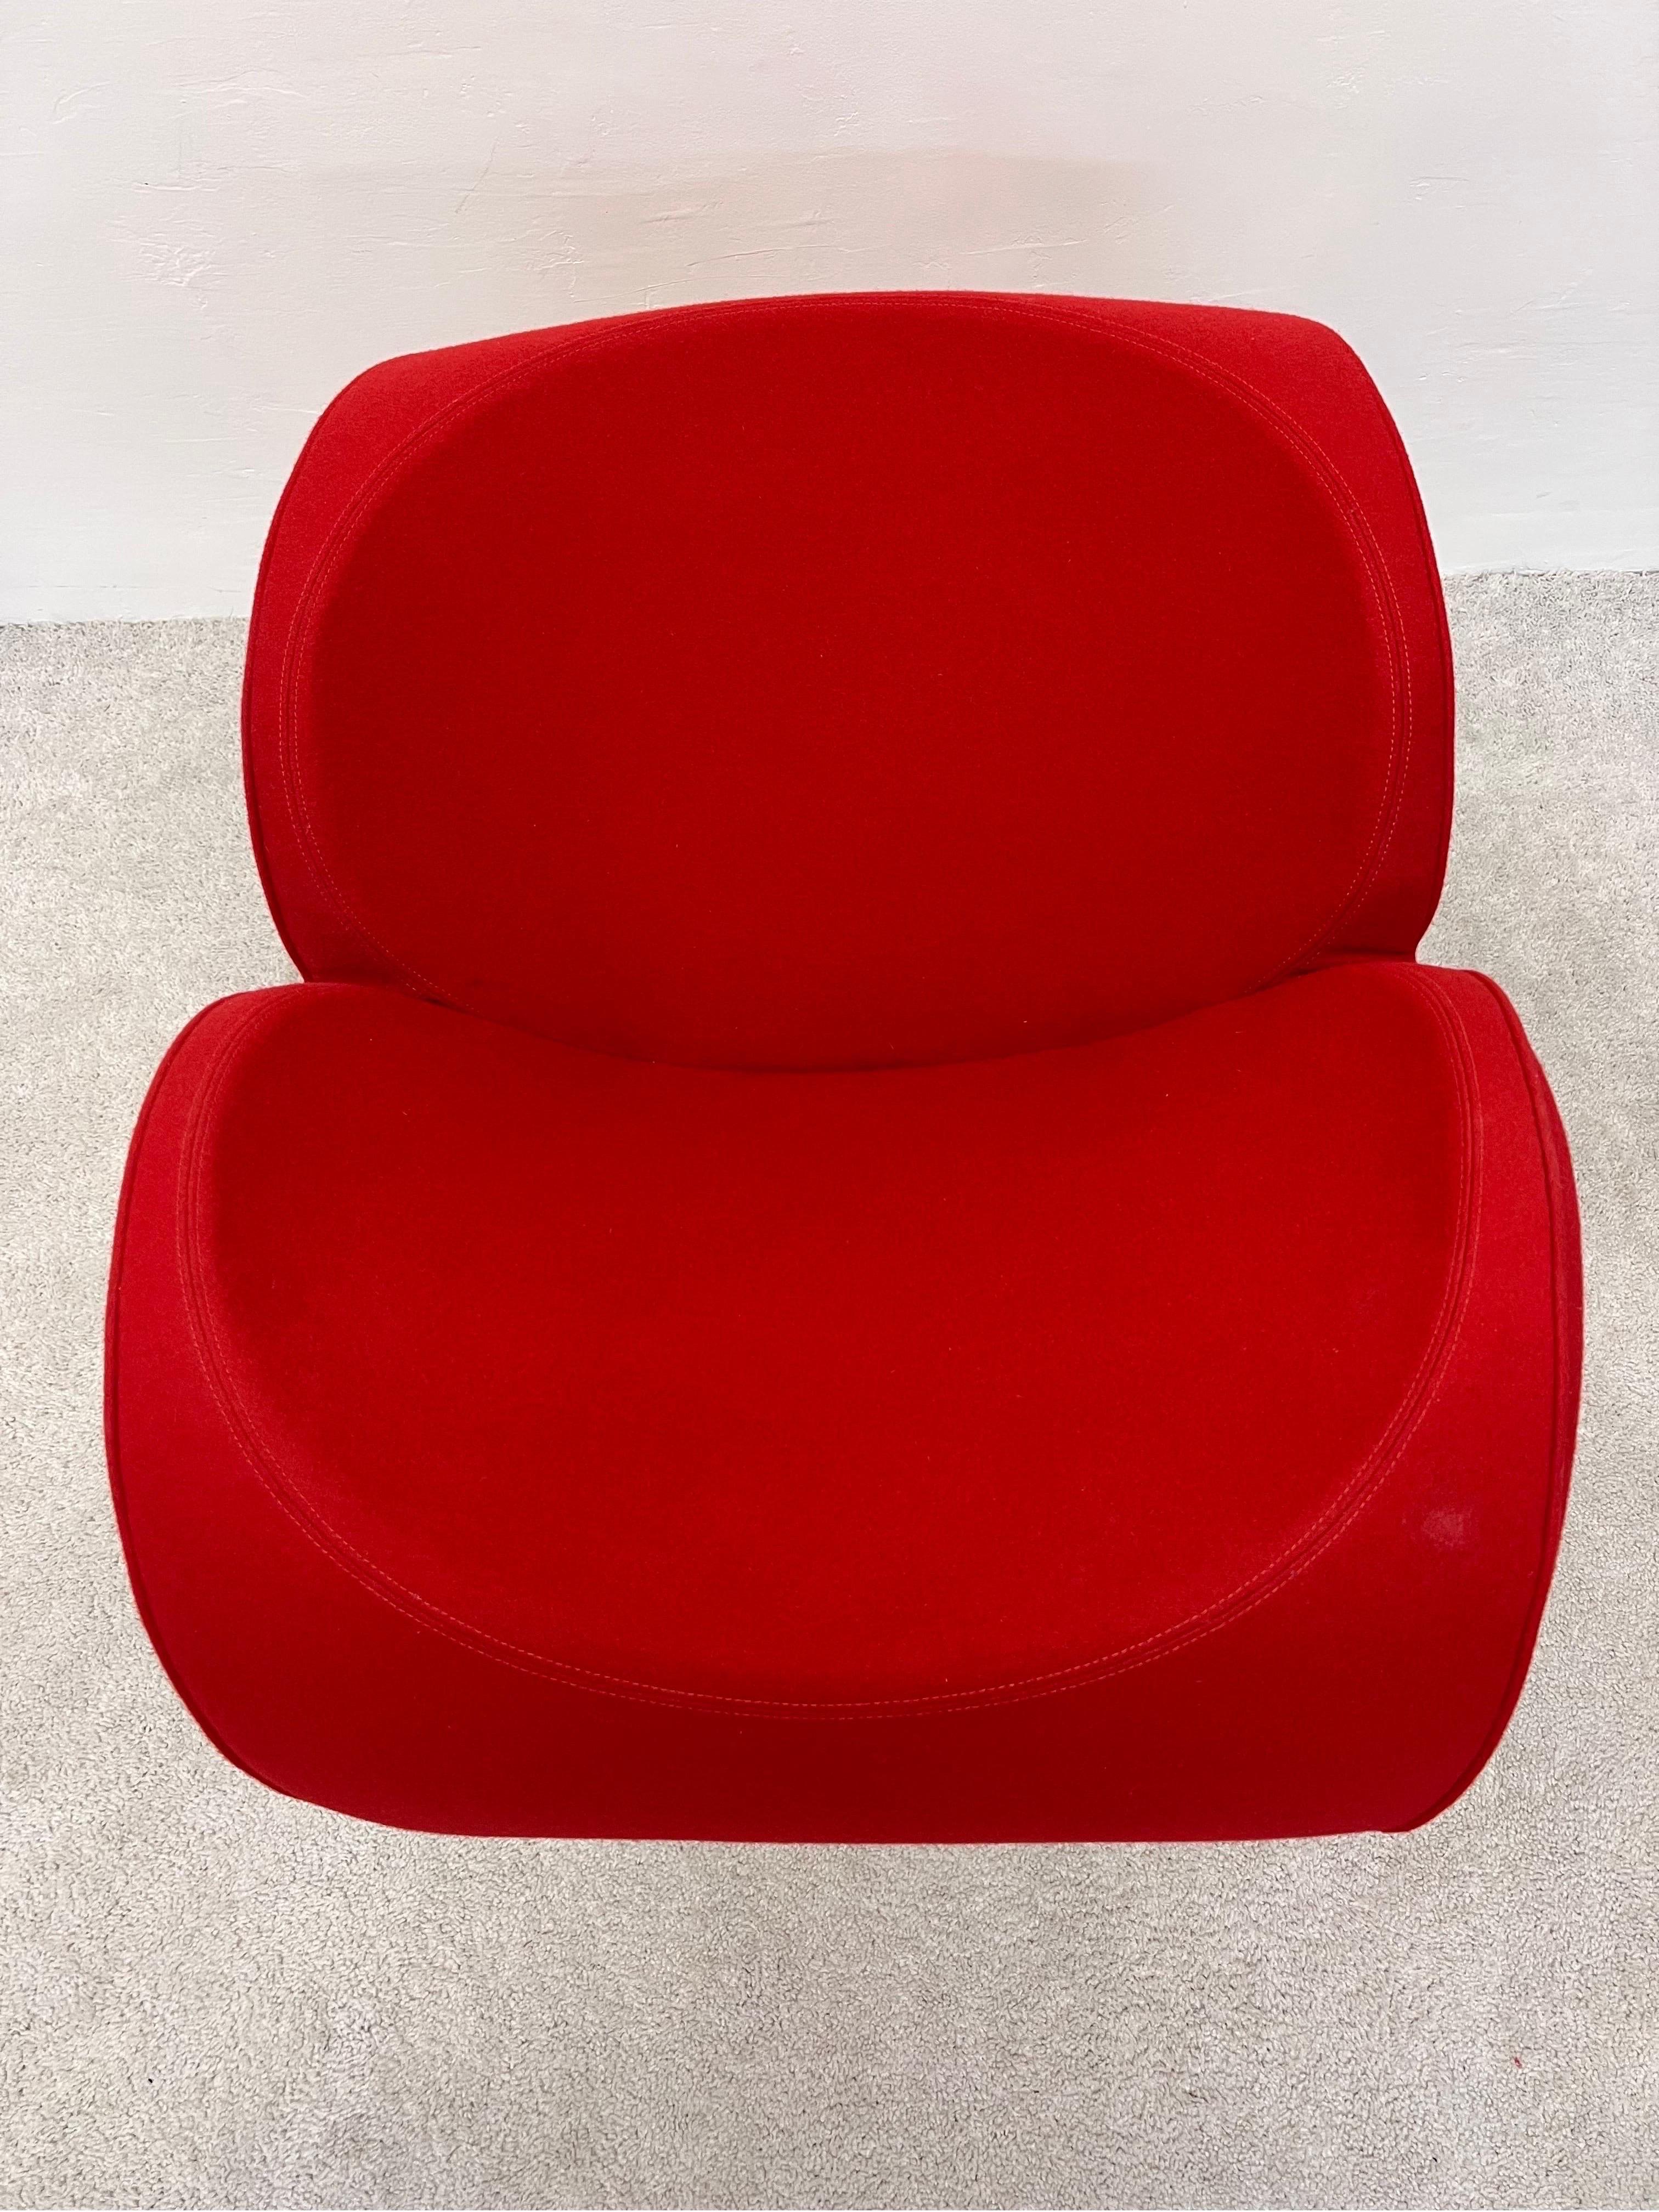 Ron Arad Spring Collection Soft Heart Chair for Moroso For Sale 5